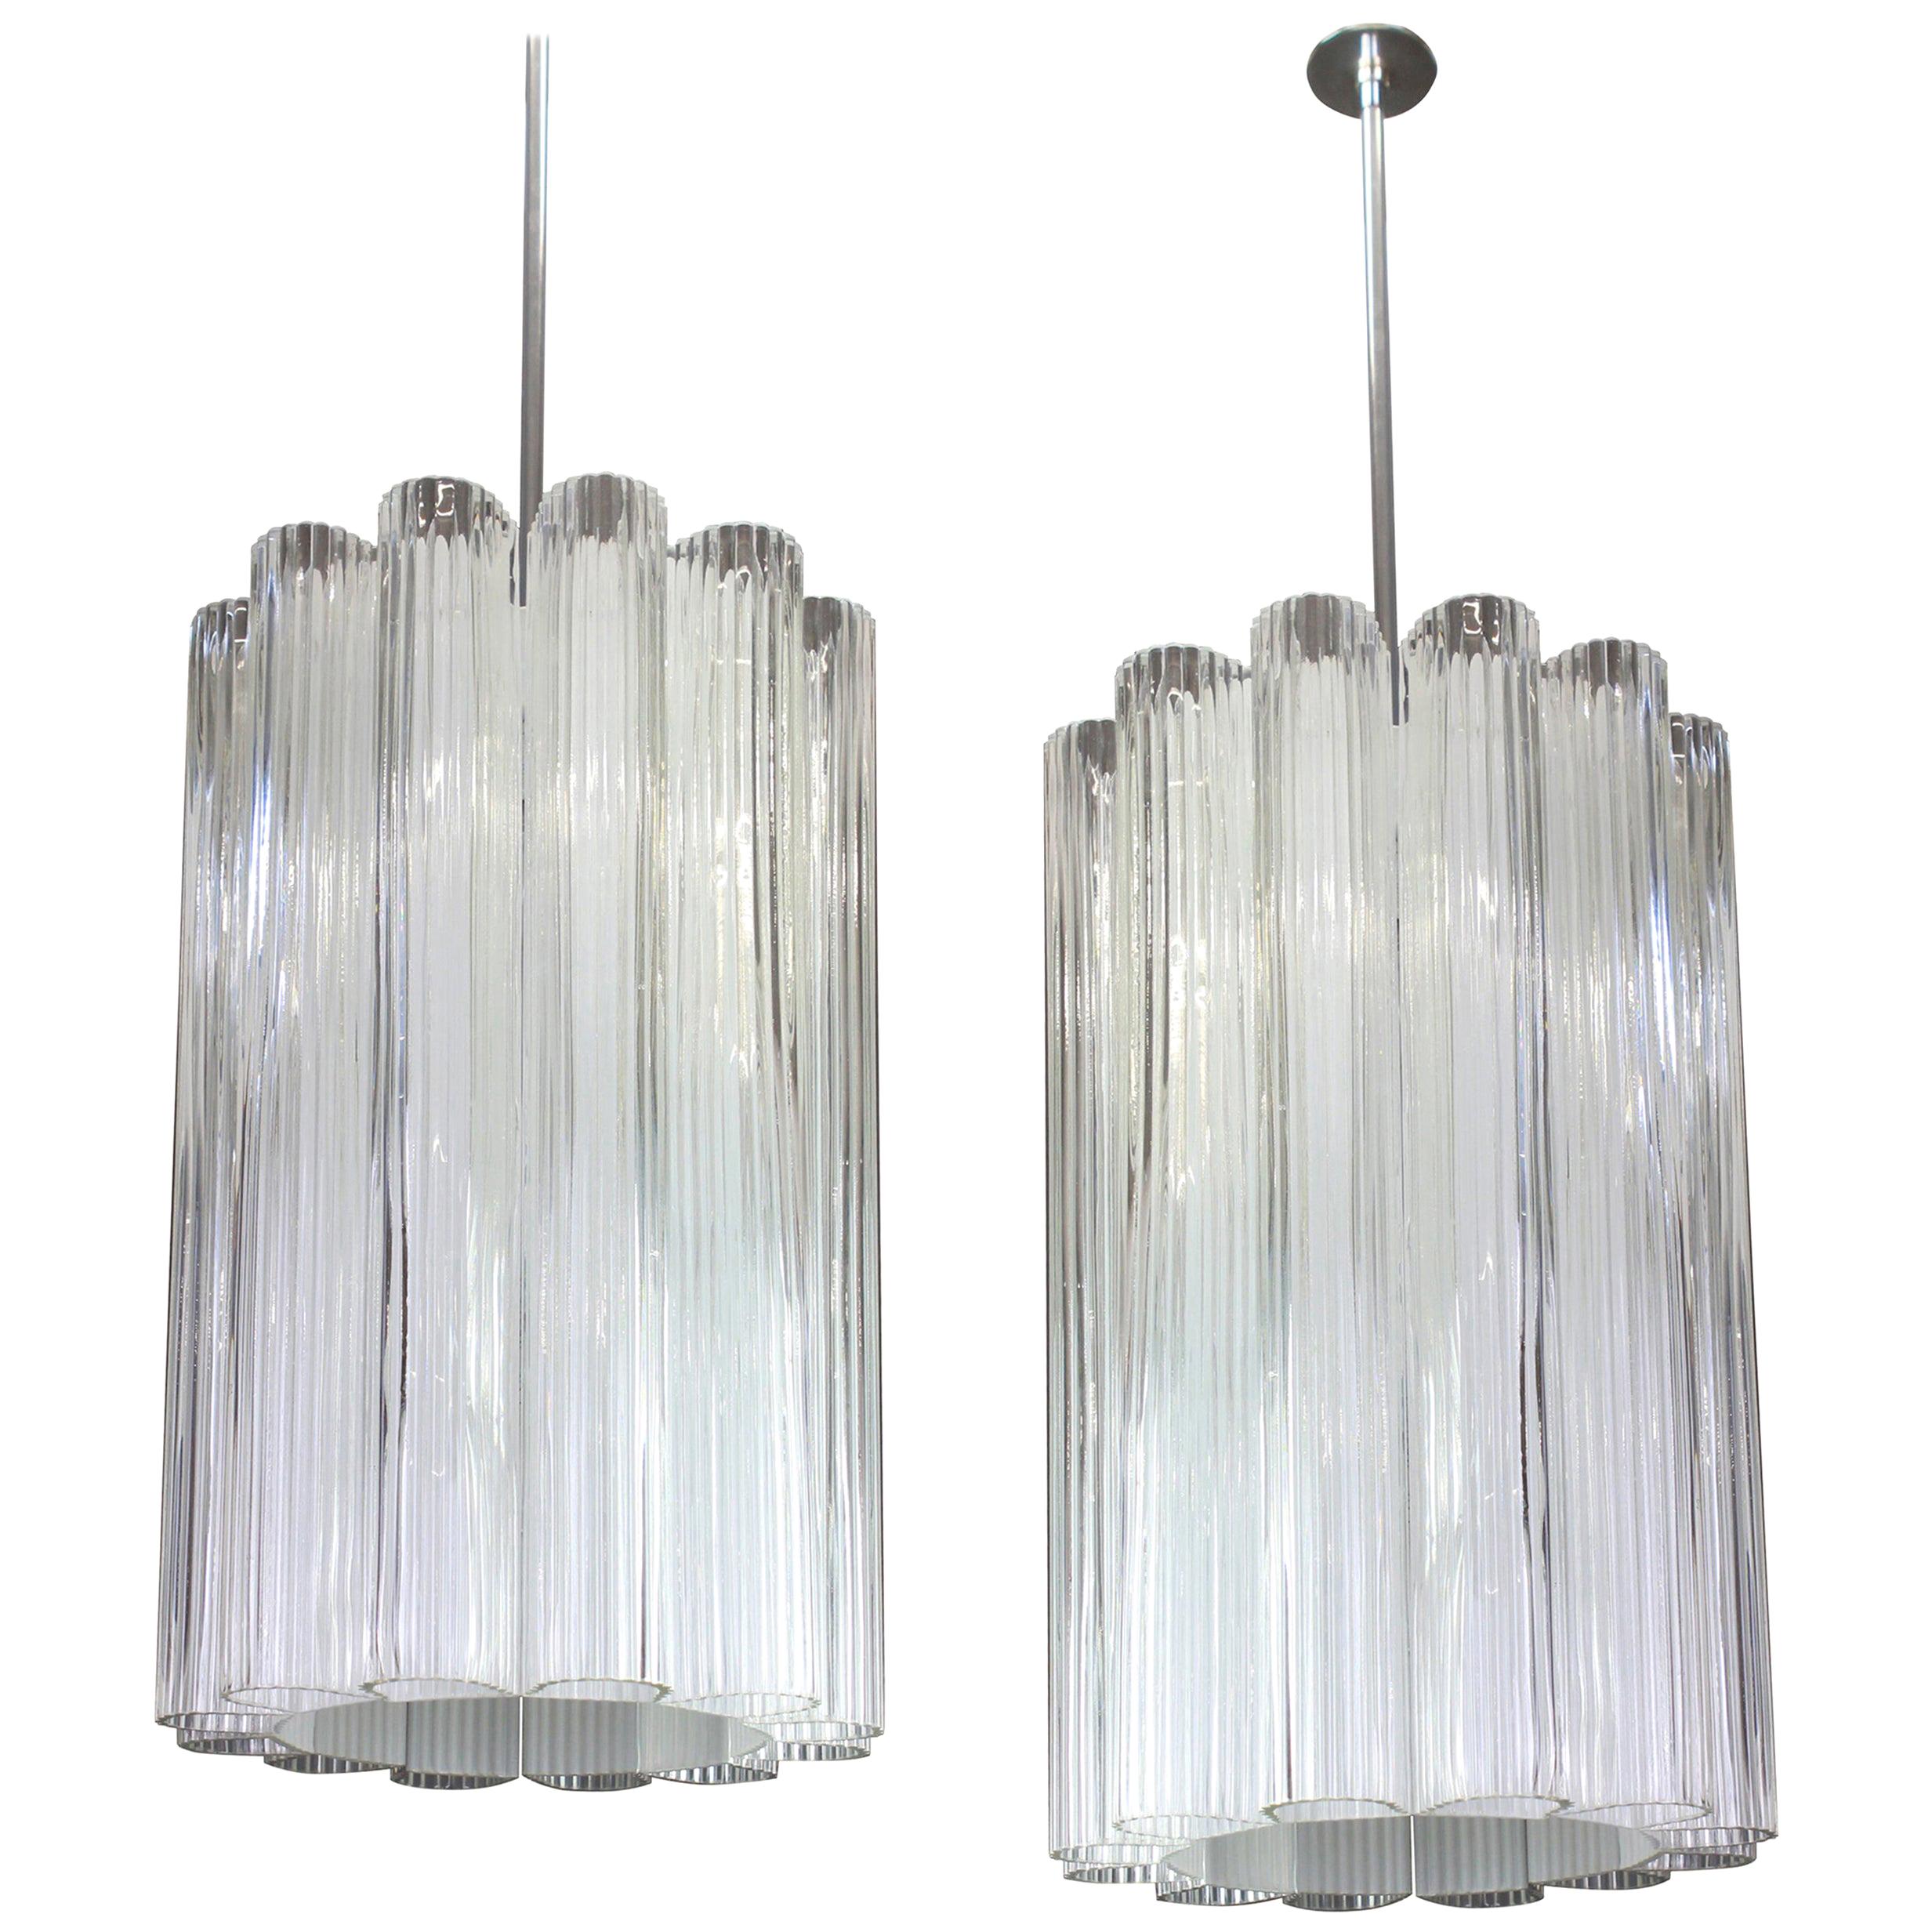 1 of 2 Cylindrical Pendant Fixture with Crystal Glass by Doria, Germany, 1960s For Sale